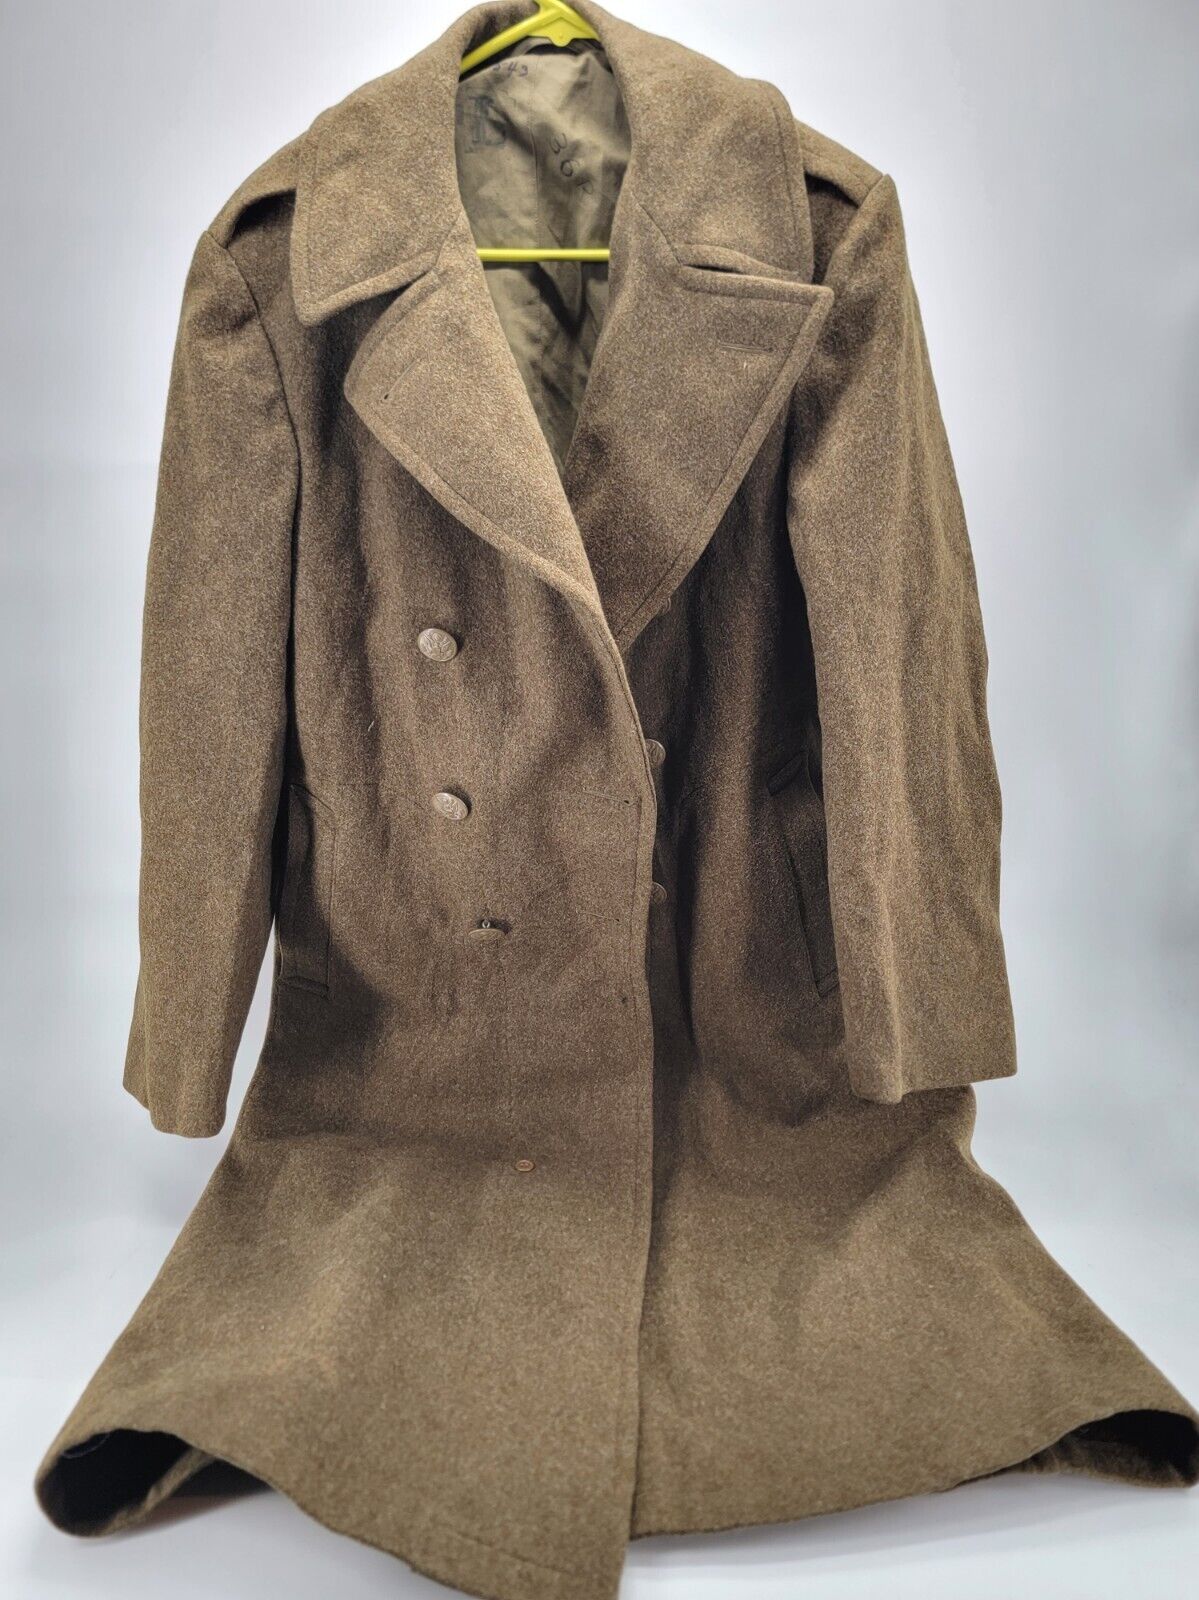 WW2 US Army Green Wool Military Trench Coat Vintage 1940 Mens Long Overcoat 36R